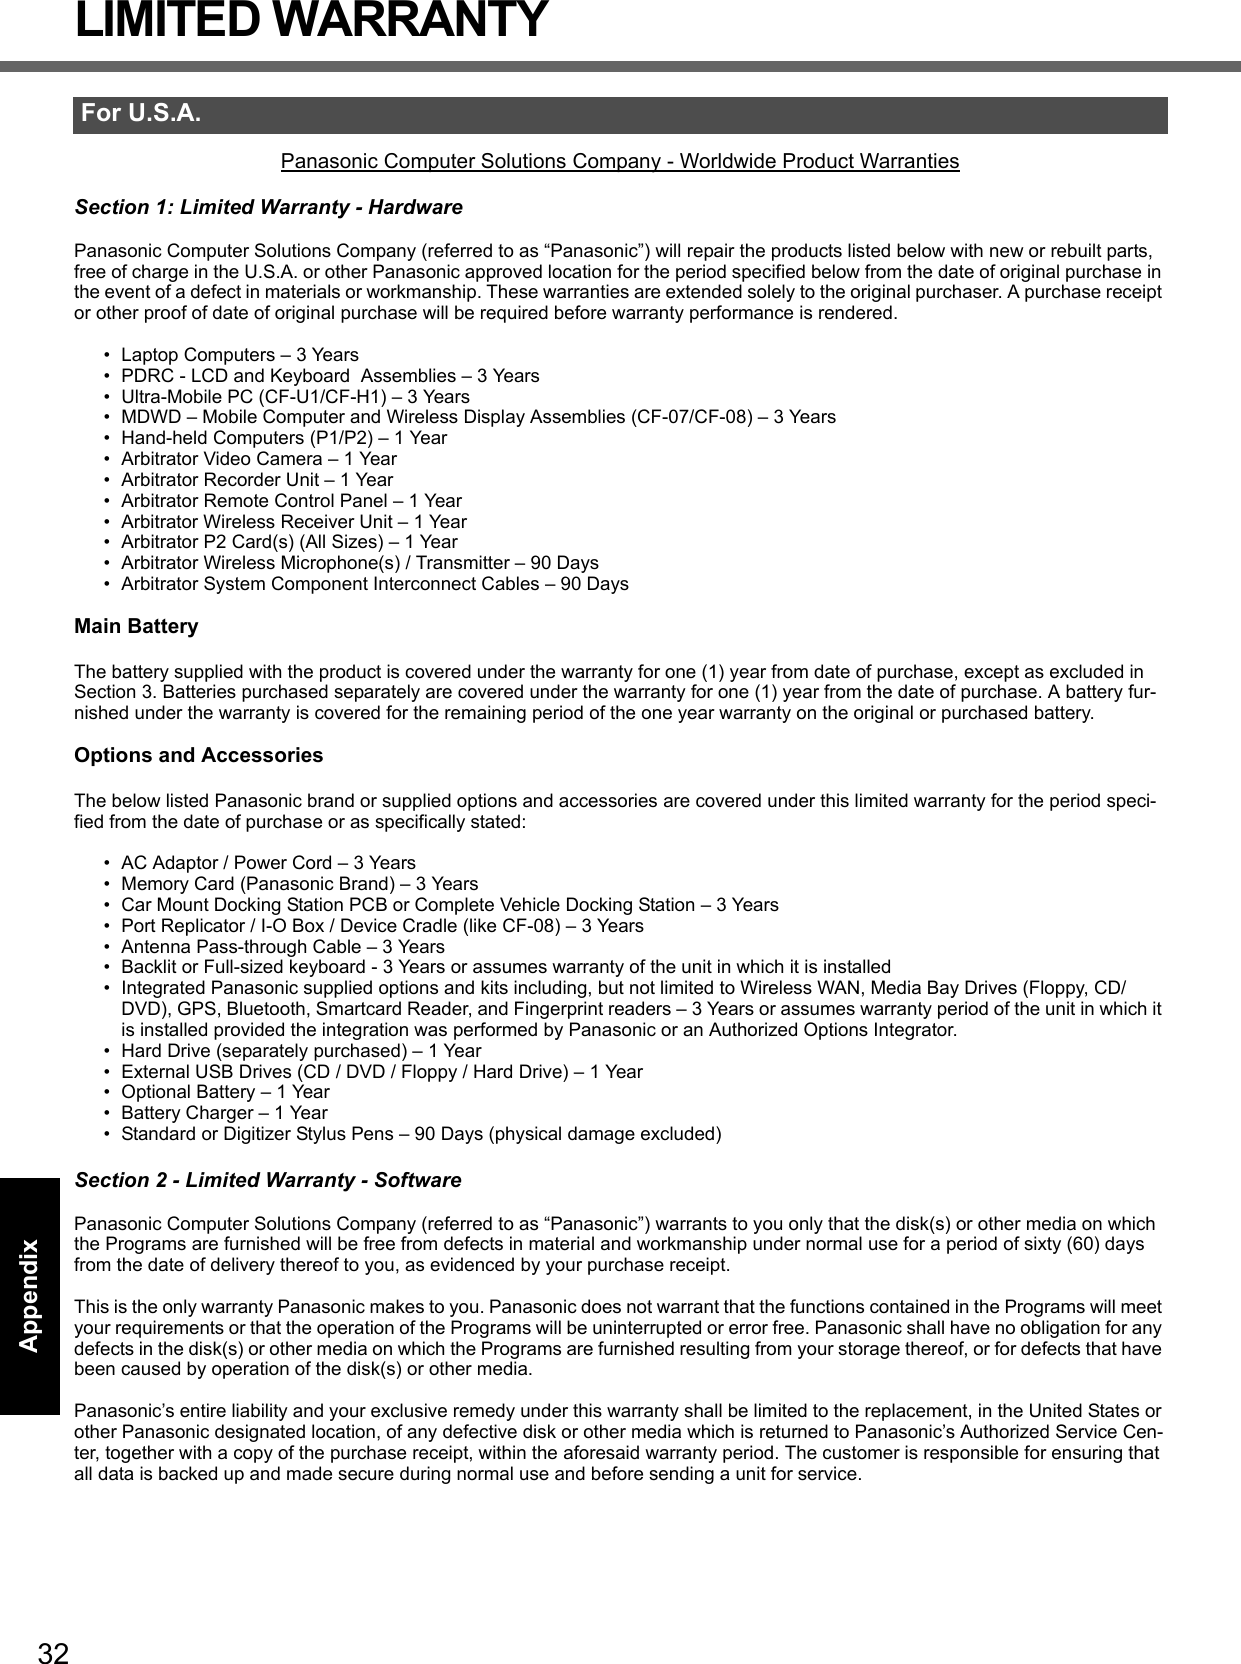 32Getting StartedUseful InformationTroubleshootingAppendixLIMITED WARRANTYPanasonic Computer Solutions Company - Worldwide Product WarrantiesSection 1: Limited Warranty - HardwarePanasonic Computer Solutions Company (referred to as “Panasonic”) will repair the products listed below with new or rebuilt parts, free of charge in the U.S.A. or other Panasonic approved location for the period specified below from the date of original purchase in the event of a defect in materials or workmanship. These warranties are extended solely to the original purchaser. A purchase receipt or other proof of date of original purchase will be required before warranty performance is rendered. • Laptop Computers – 3 Years• PDRC - LCD and Keyboard  Assemblies – 3 Years• Ultra-Mobile PC (CF-U1/CF-H1) – 3 Years• MDWD – Mobile Computer and Wireless Display Assemblies (CF-07/CF-08) – 3 Years• Hand-held Computers (P1/P2) – 1 Year• Arbitrator Video Camera – 1 Year• Arbitrator Recorder Unit – 1 Year• Arbitrator Remote Control Panel – 1 Year• Arbitrator Wireless Receiver Unit – 1 Year• Arbitrator P2 Card(s) (All Sizes) – 1 Year• Arbitrator Wireless Microphone(s) / Transmitter – 90 Days• Arbitrator System Component Interconnect Cables – 90 DaysMain BatteryThe battery supplied with the product is covered under the warranty for one (1) year from date of purchase, except as excluded in Section 3. Batteries purchased separately are covered under the warranty for one (1) year from the date of purchase. A battery fur-nished under the warranty is covered for the remaining period of the one year warranty on the original or purchased battery.Options and AccessoriesThe below listed Panasonic brand or supplied options and accessories are covered under this limited warranty for the period speci-fied from the date of purchase or as specifically stated:• AC Adaptor / Power Cord – 3 Years• Memory Card (Panasonic Brand) – 3 Years • Car Mount Docking Station PCB or Complete Vehicle Docking Station – 3 Years• Port Replicator / I-O Box / Device Cradle (like CF-08) – 3 Years• Antenna Pass-through Cable – 3 Years• Backlit or Full-sized keyboard - 3 Years or assumes warranty of the unit in which it is installed• Integrated Panasonic supplied options and kits including, but not limited to Wireless WAN, Media Bay Drives (Floppy, CD/DVD), GPS, Bluetooth, Smartcard Reader, and Fingerprint readers – 3 Years or assumes warranty period of the unit in which it is installed provided the integration was performed by Panasonic or an Authorized Options Integrator.• Hard Drive (separately purchased) – 1 Year• External USB Drives (CD / DVD / Floppy / Hard Drive) – 1 Year• Optional Battery – 1 Year• Battery Charger – 1 Year• Standard or Digitizer Stylus Pens – 90 Days (physical damage excluded)Section 2 - Limited Warranty - SoftwarePanasonic Computer Solutions Company (referred to as “Panasonic”) warrants to you only that the disk(s) or other media on which the Programs are furnished will be free from defects in material and workmanship under normal use for a period of sixty (60) days from the date of delivery thereof to you, as evidenced by your purchase receipt.This is the only warranty Panasonic makes to you. Panasonic does not warrant that the functions contained in the Programs will meet your requirements or that the operation of the Programs will be uninterrupted or error free. Panasonic shall have no obligation for any defects in the disk(s) or other media on which the Programs are furnished resulting from your storage thereof, or for defects that have been caused by operation of the disk(s) or other media.Panasonic’s entire liability and your exclusive remedy under this warranty shall be limited to the replacement, in the United States or other Panasonic designated location, of any defective disk or other media which is returned to Panasonic’s Authorized Service Cen-ter, together with a copy of the purchase receipt, within the aforesaid warranty period. The customer is responsible for ensuring that all data is backed up and made secure during normal use and before sending a unit for service. For U.S.A.DFQW5355ZAT_52mk3_XP7_OI_EN.book  32 ページ  ２００９年１２月２９日　火曜日　午後１時４７分